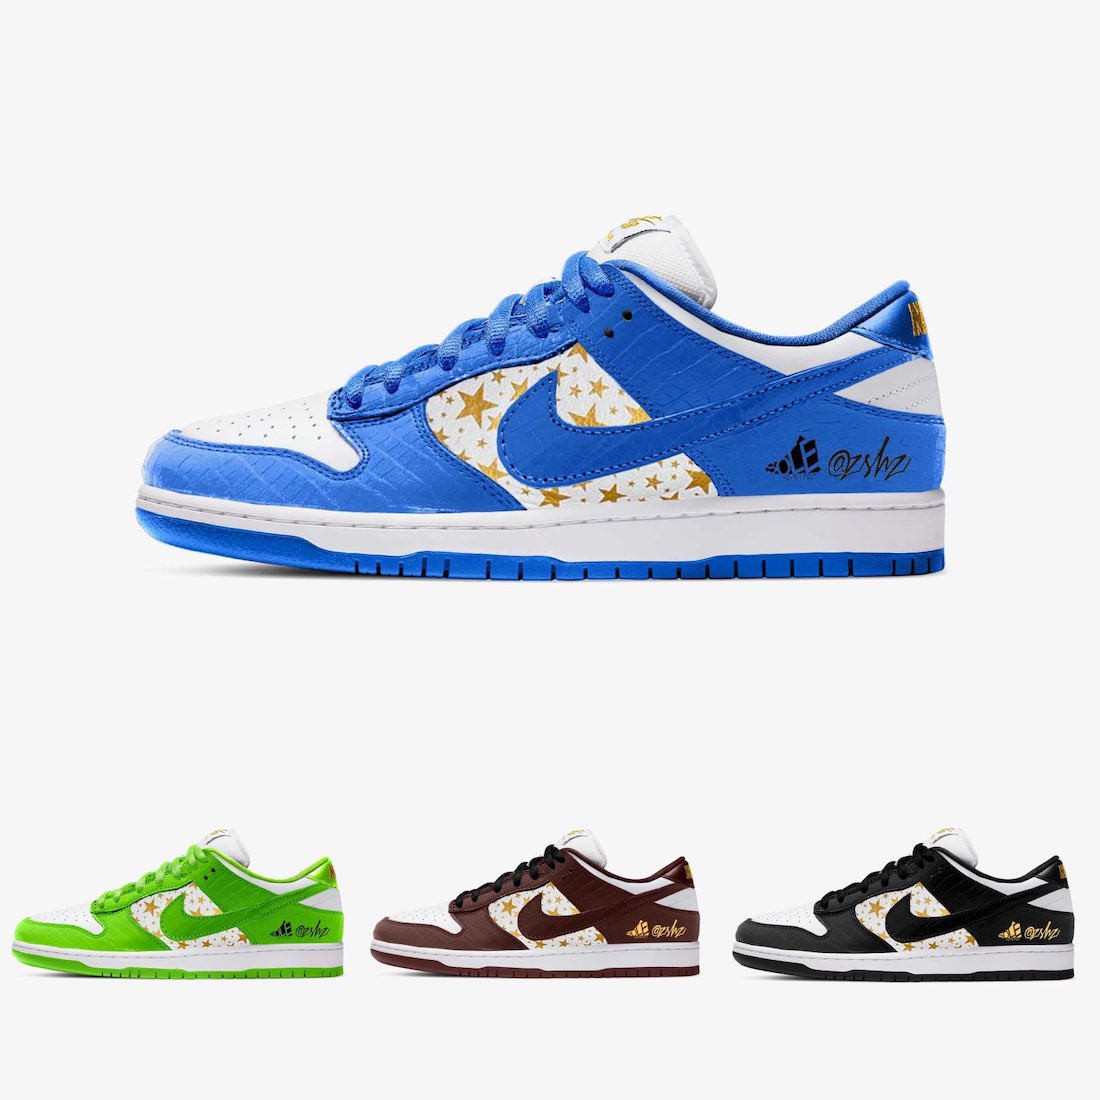 Supreme Nike SB Dunk Low DH3228-100 DH3228-101 DH3228-102 DH3228-103 Release Date